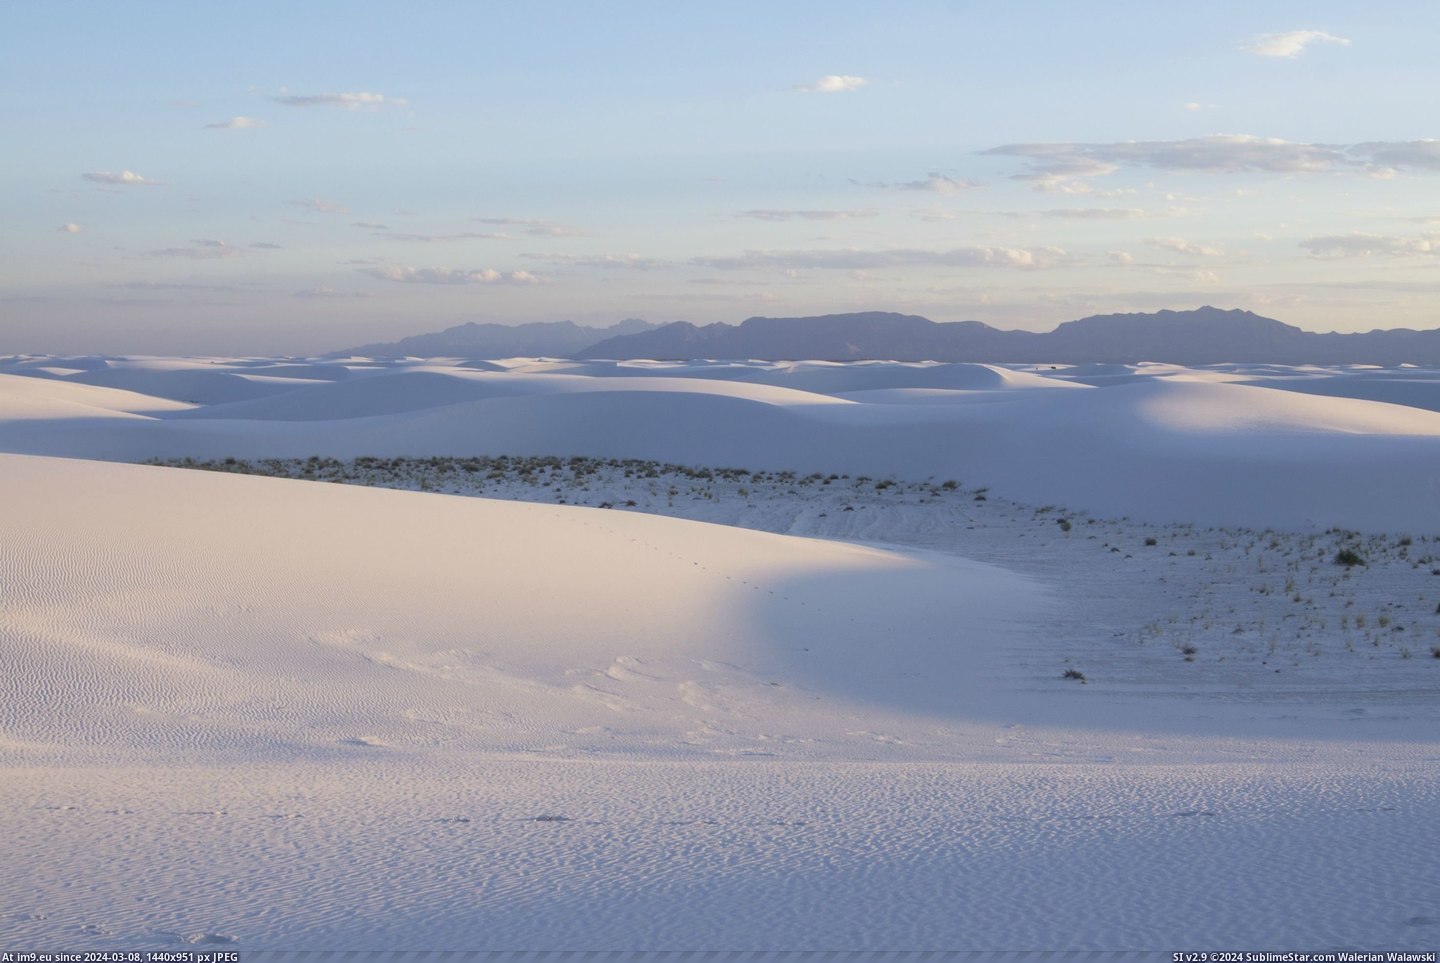 #White #National #Breathtaking #Sands #4912x3264 #Sunset #Monument [Earthporn] White Sands National Monument is breathtaking just before sunset (OC) [4912x3264] Pic. (Image of album My r/EARTHPORN favs))